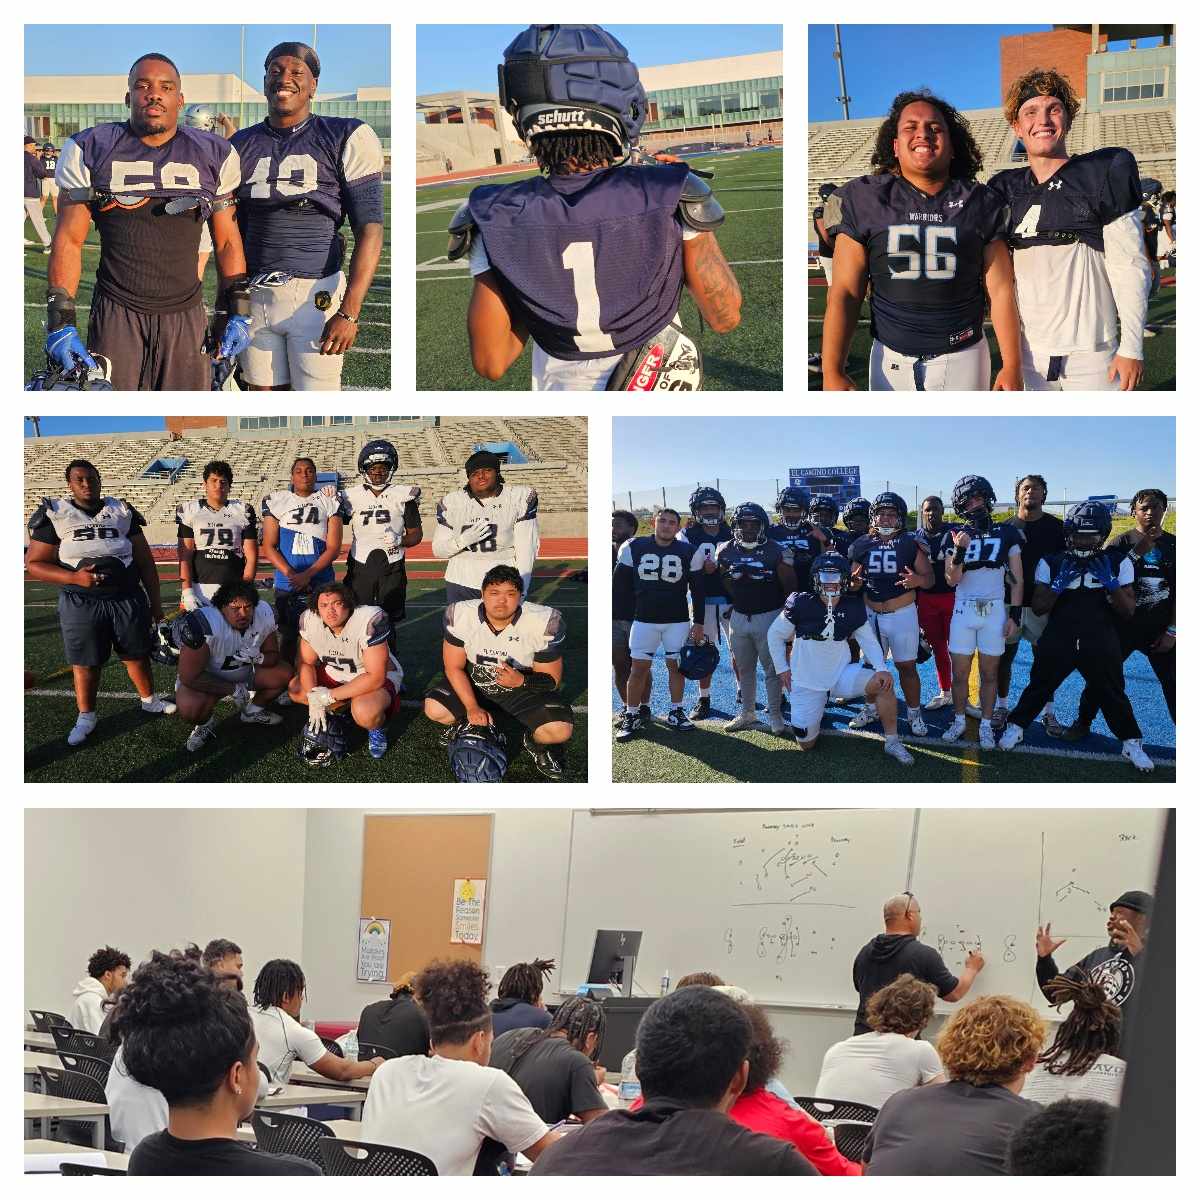 Another week of El Camino College Warrior Spring Football. Getting better, Getting after it, and having some fun.